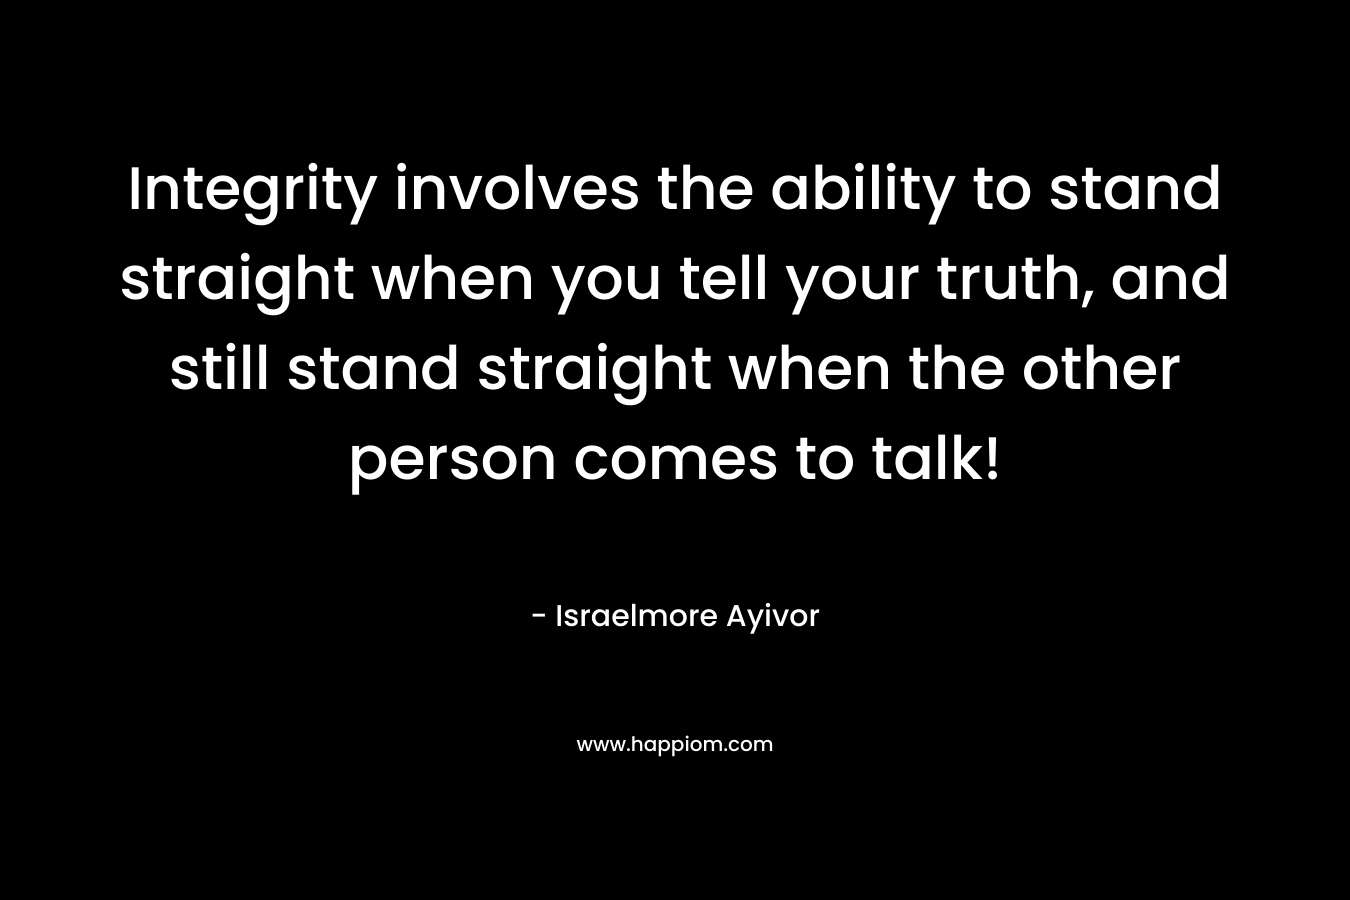 Integrity involves the ability to stand straight when you tell your truth, and still stand straight when the other person comes to talk!